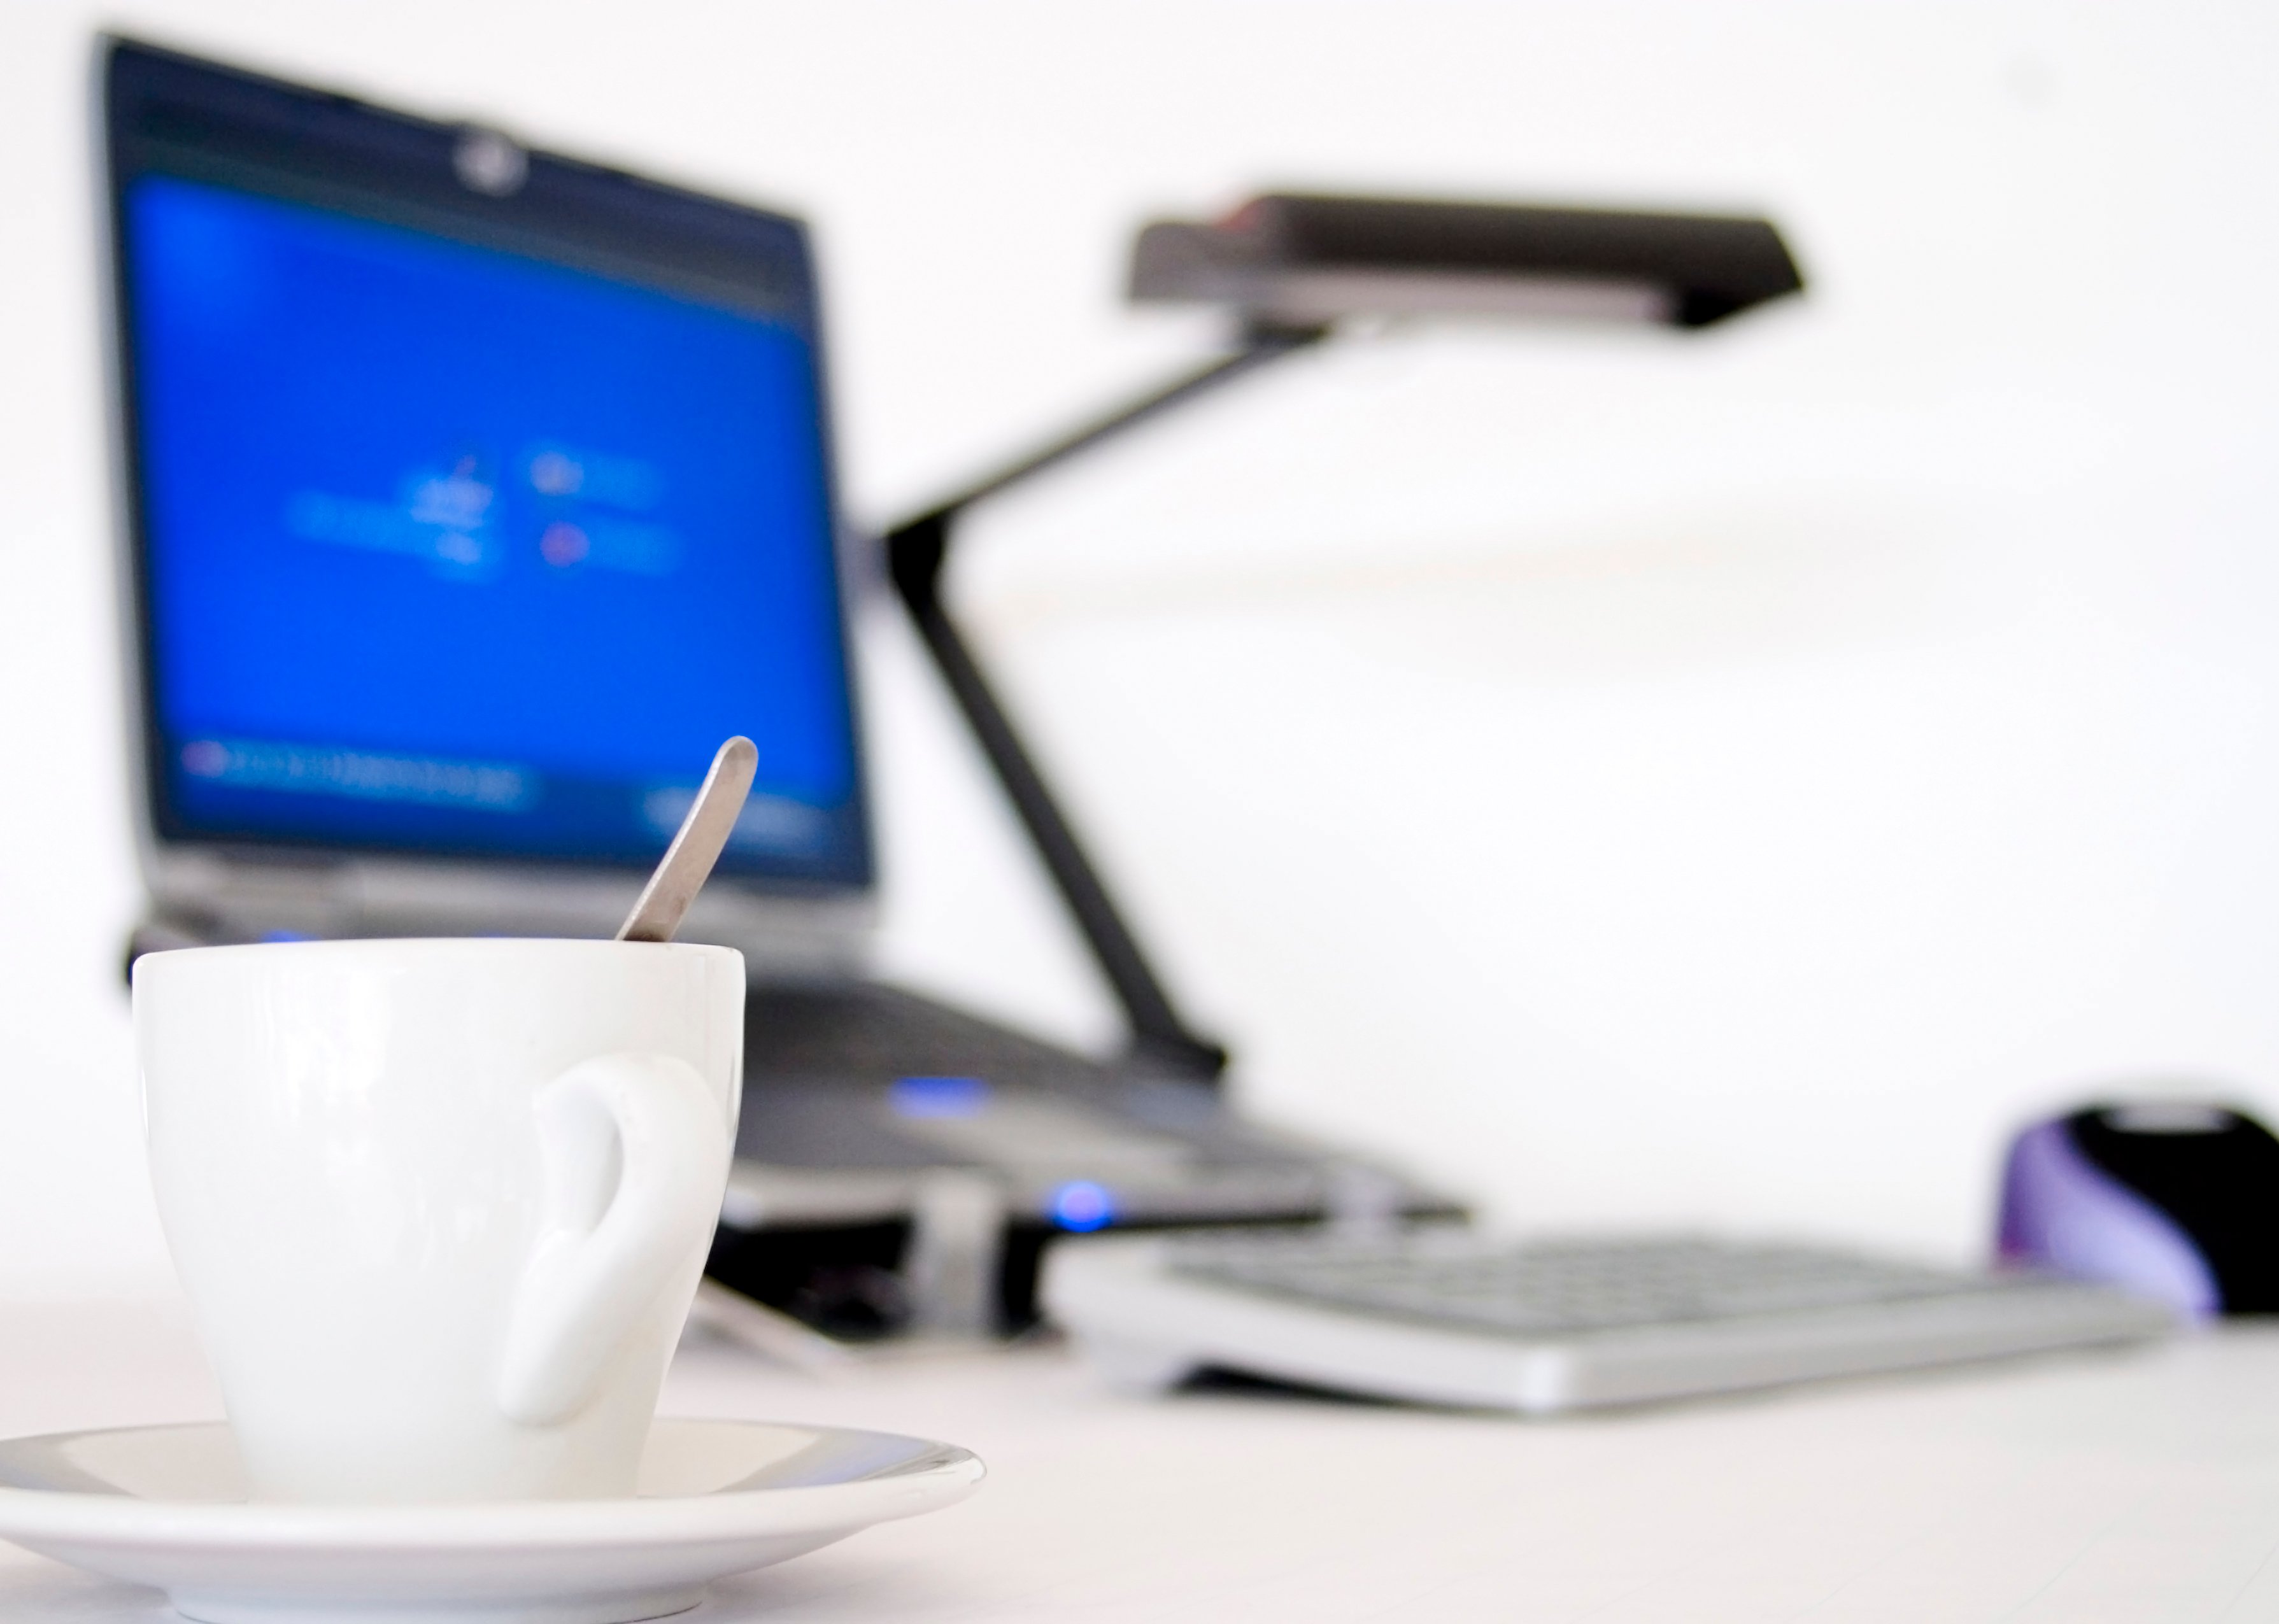 image focused on cup of coffee, with blurry laptop in background